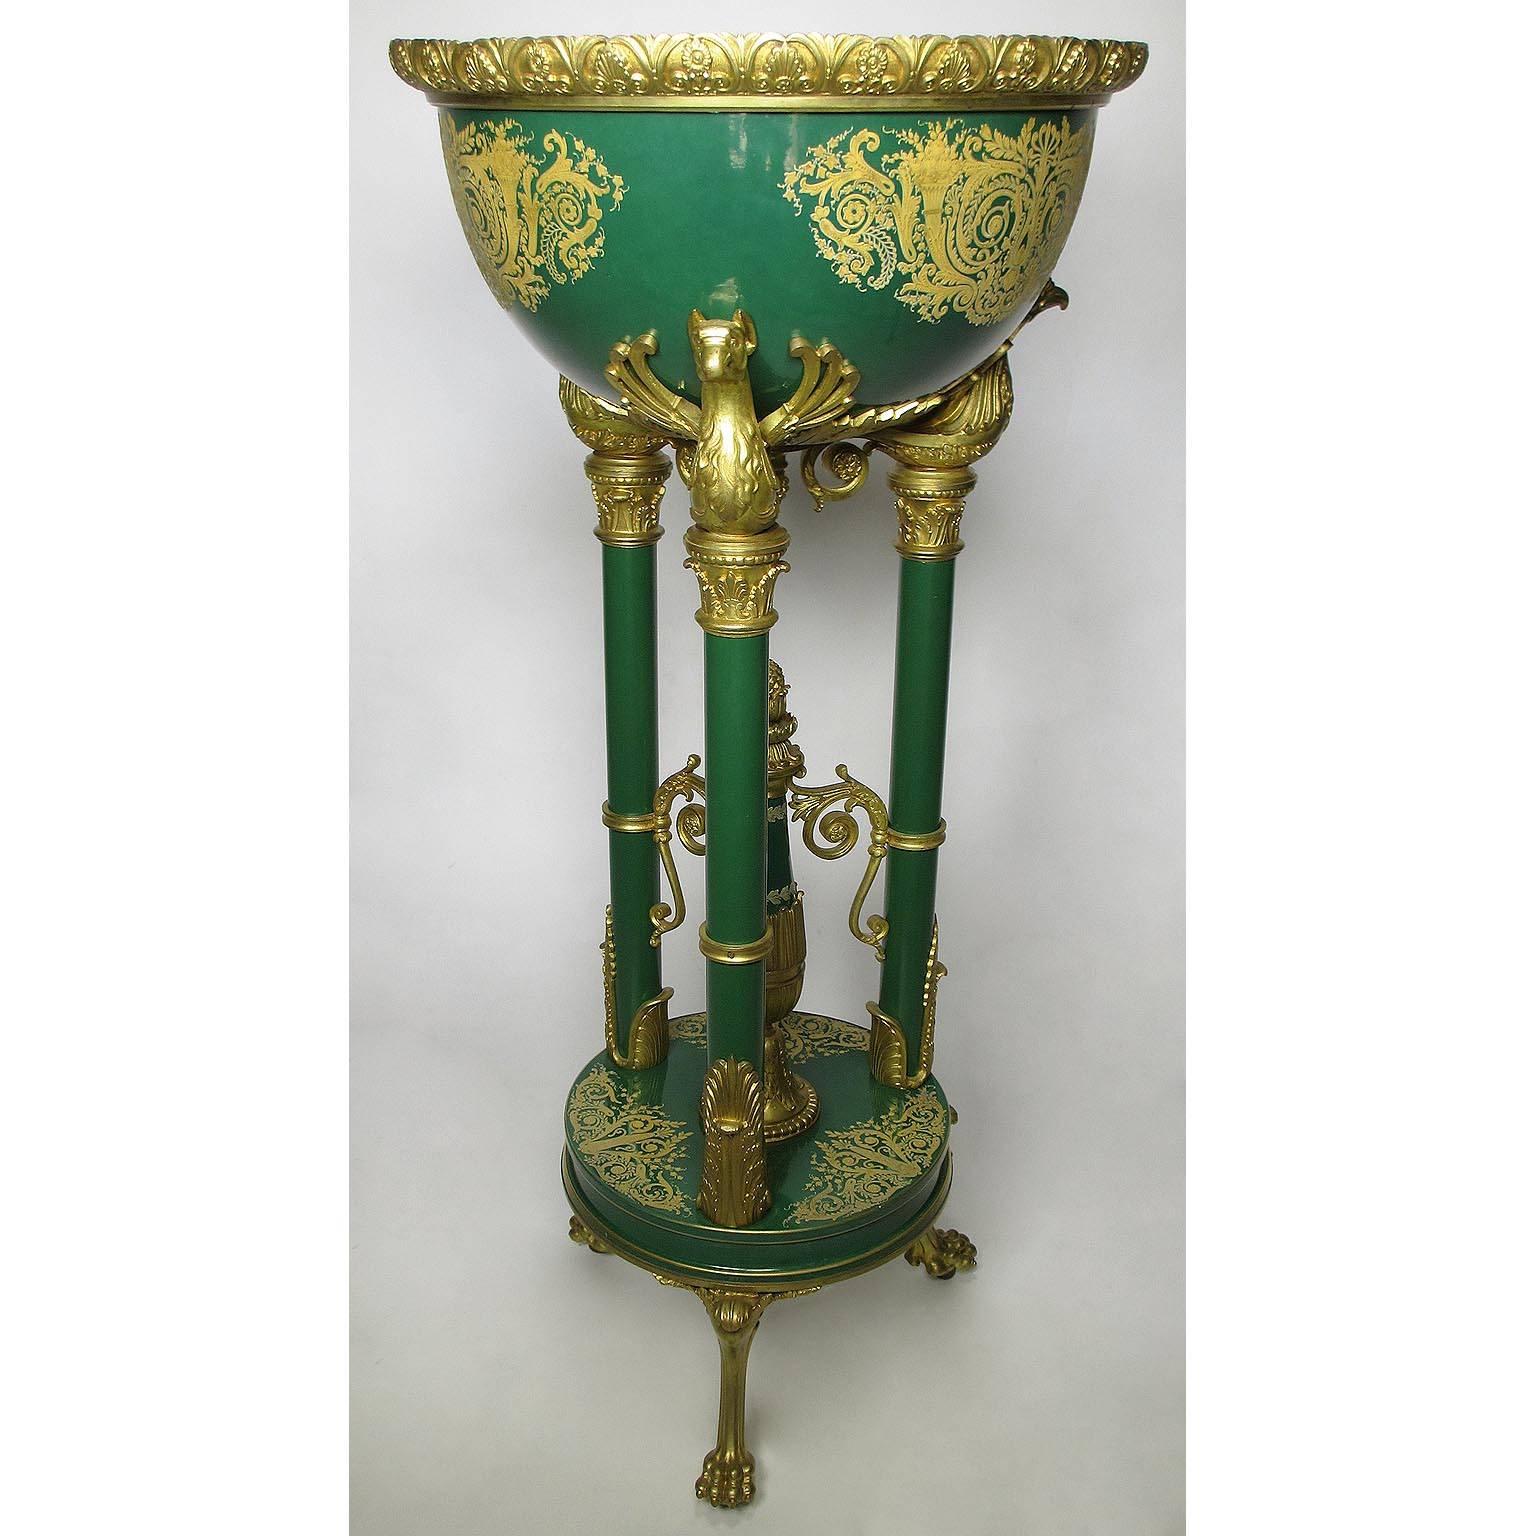 Fine French 19th Century Napoleon III Gilt Bronze-Mounted Porcelain Planter In Good Condition For Sale In Los Angeles, CA